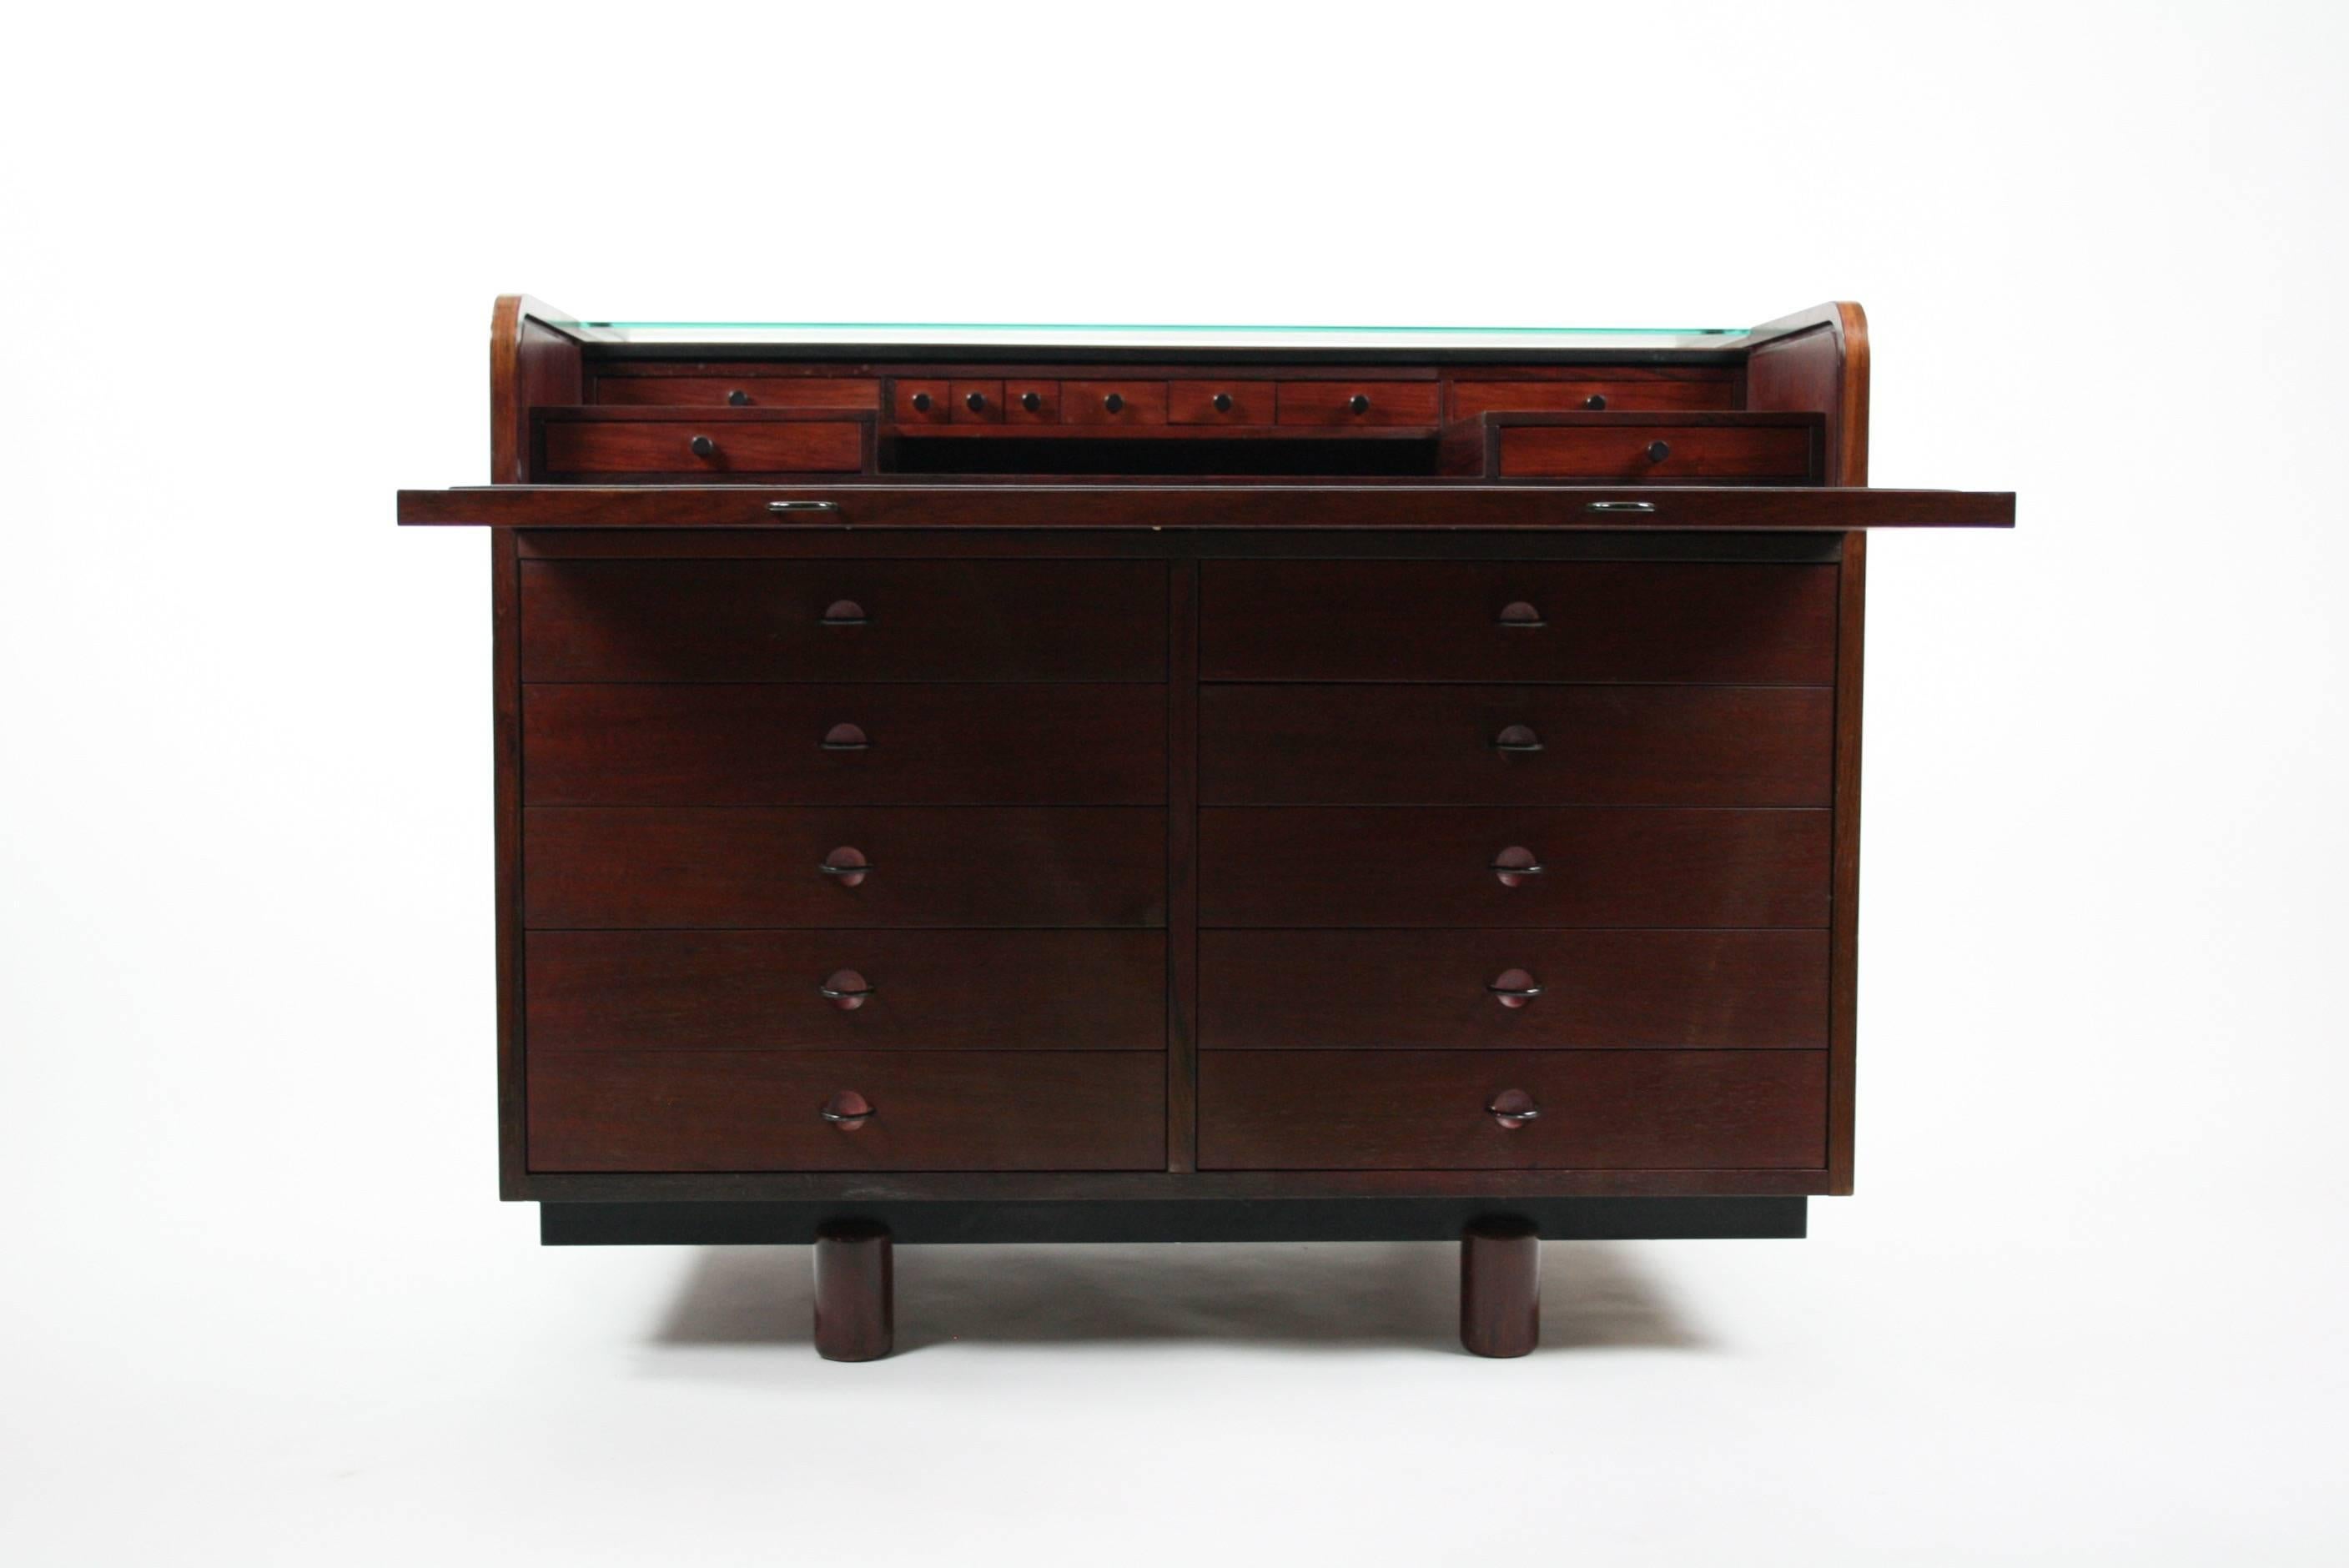 Vintage multi-secretary writing desk model 804 designed by Gianfranco Frattini for Bernini, Italy, circa 1961. Multifunctional secretary in the rare rosewood version. Frattini was a major exponent of the Italian design movement of the 1950s and